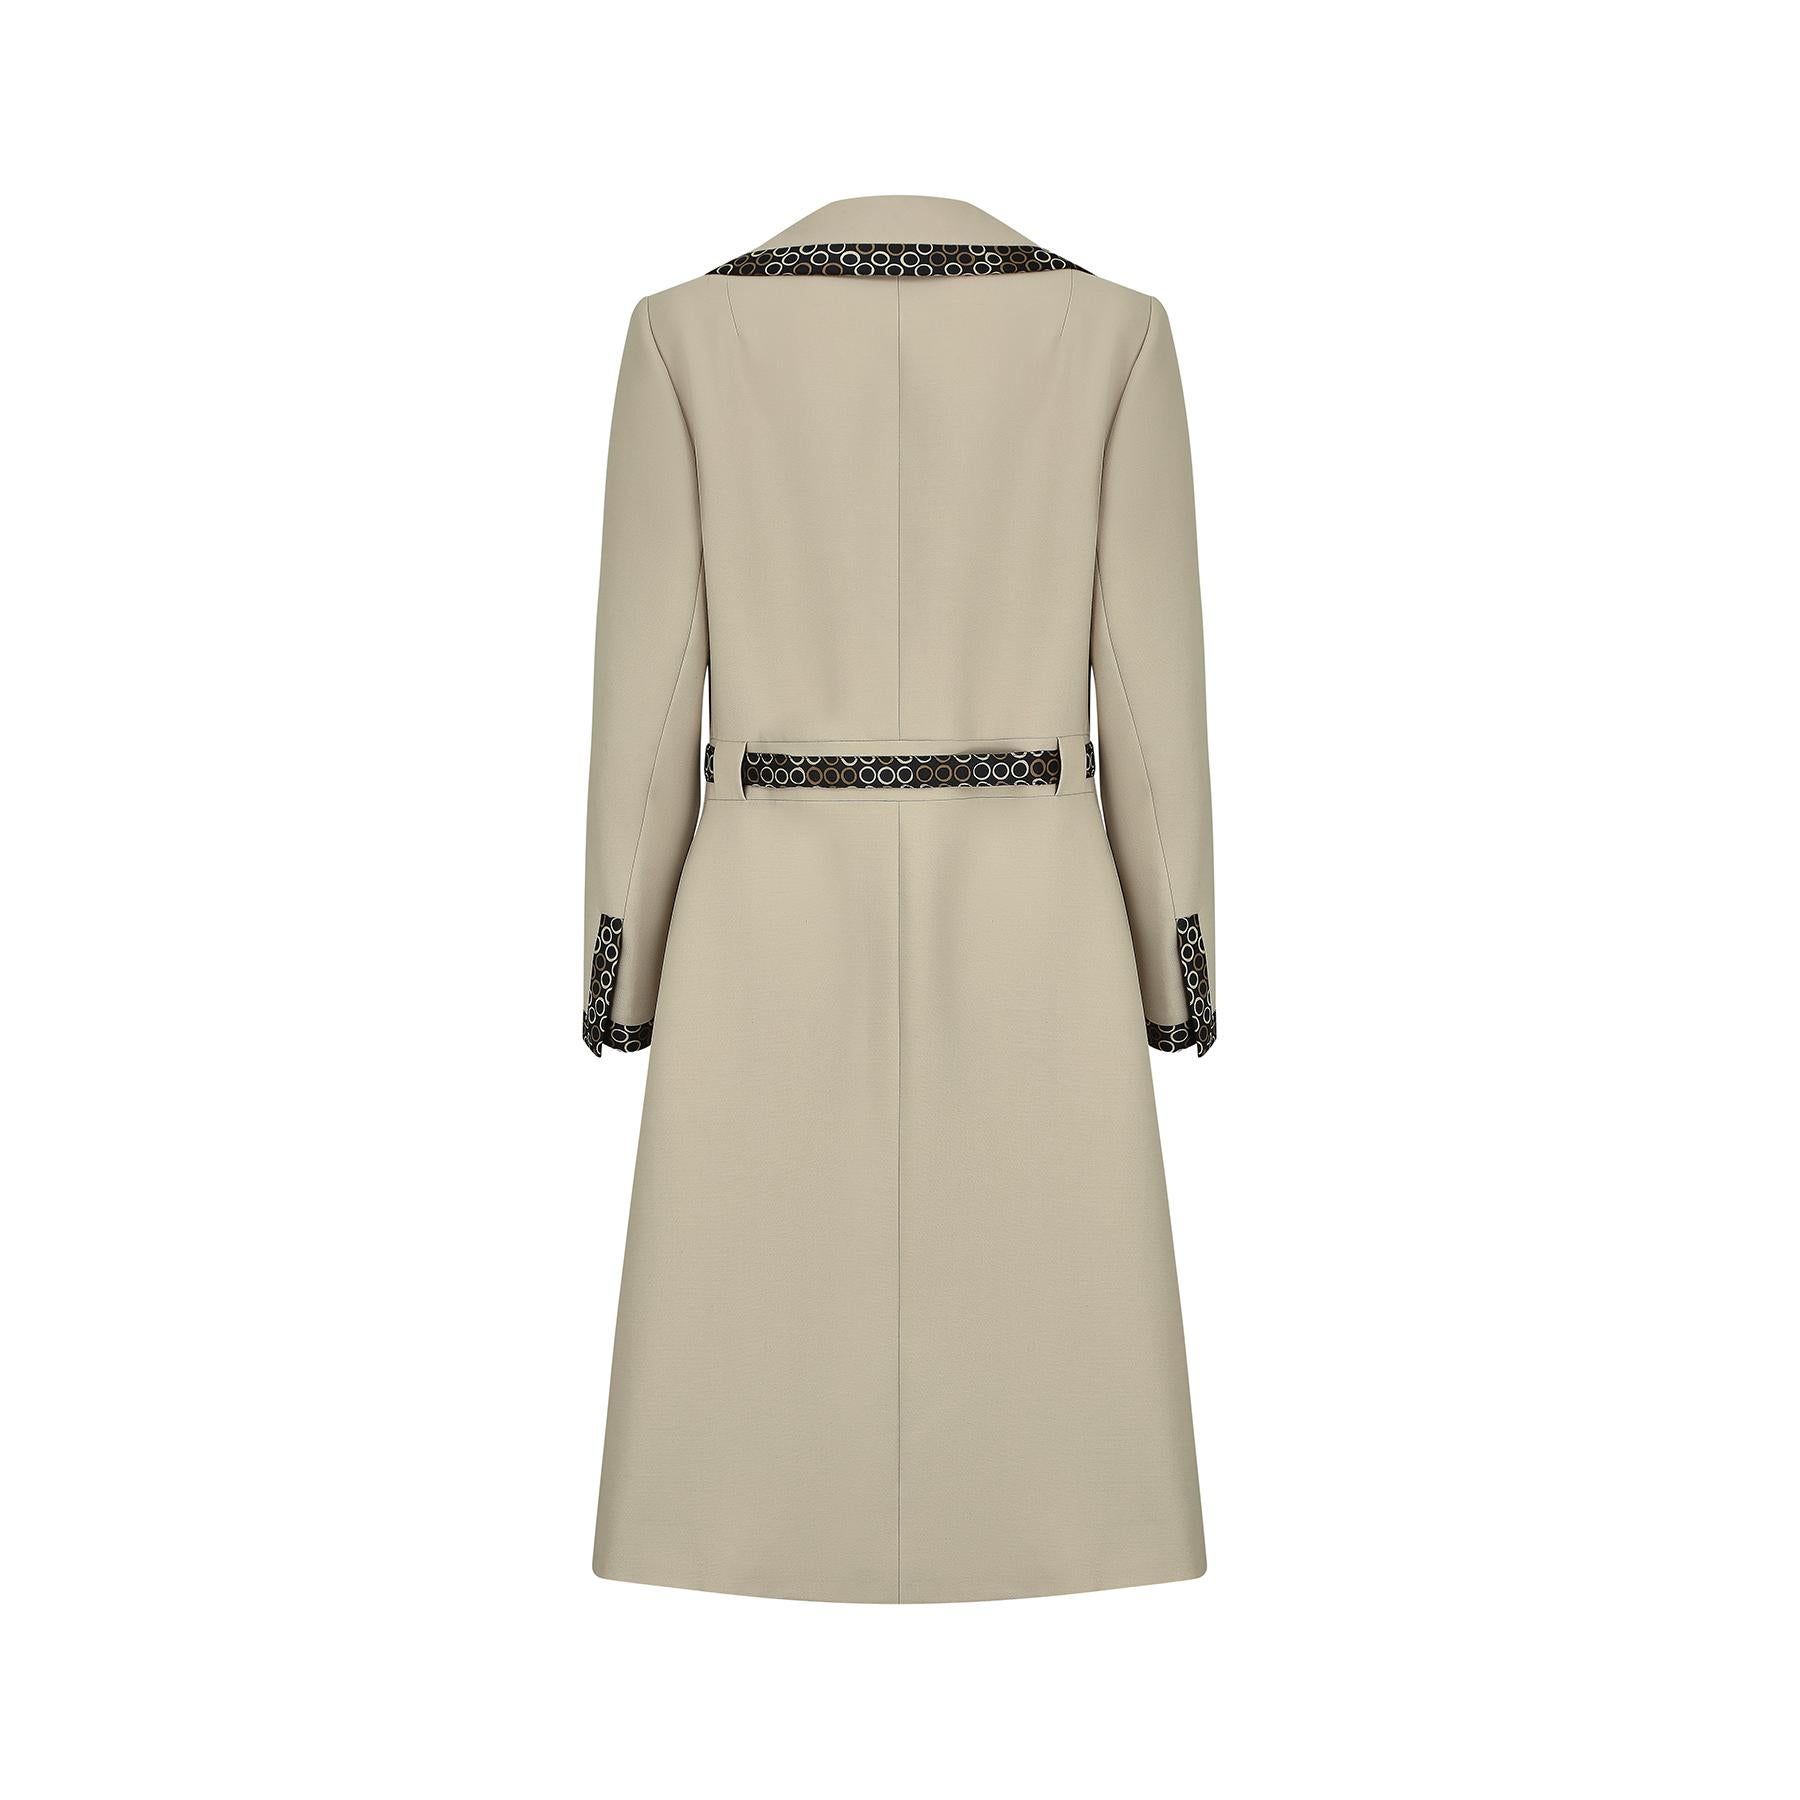 This is a very late 1960s or 1970 Jean Patou pale taupe coloured gabardine coat with the tailored in London label.  It has a stylish double-cut lapel and striking geometric circular pattern silk twill trim that runs along all the edges.  The fabric